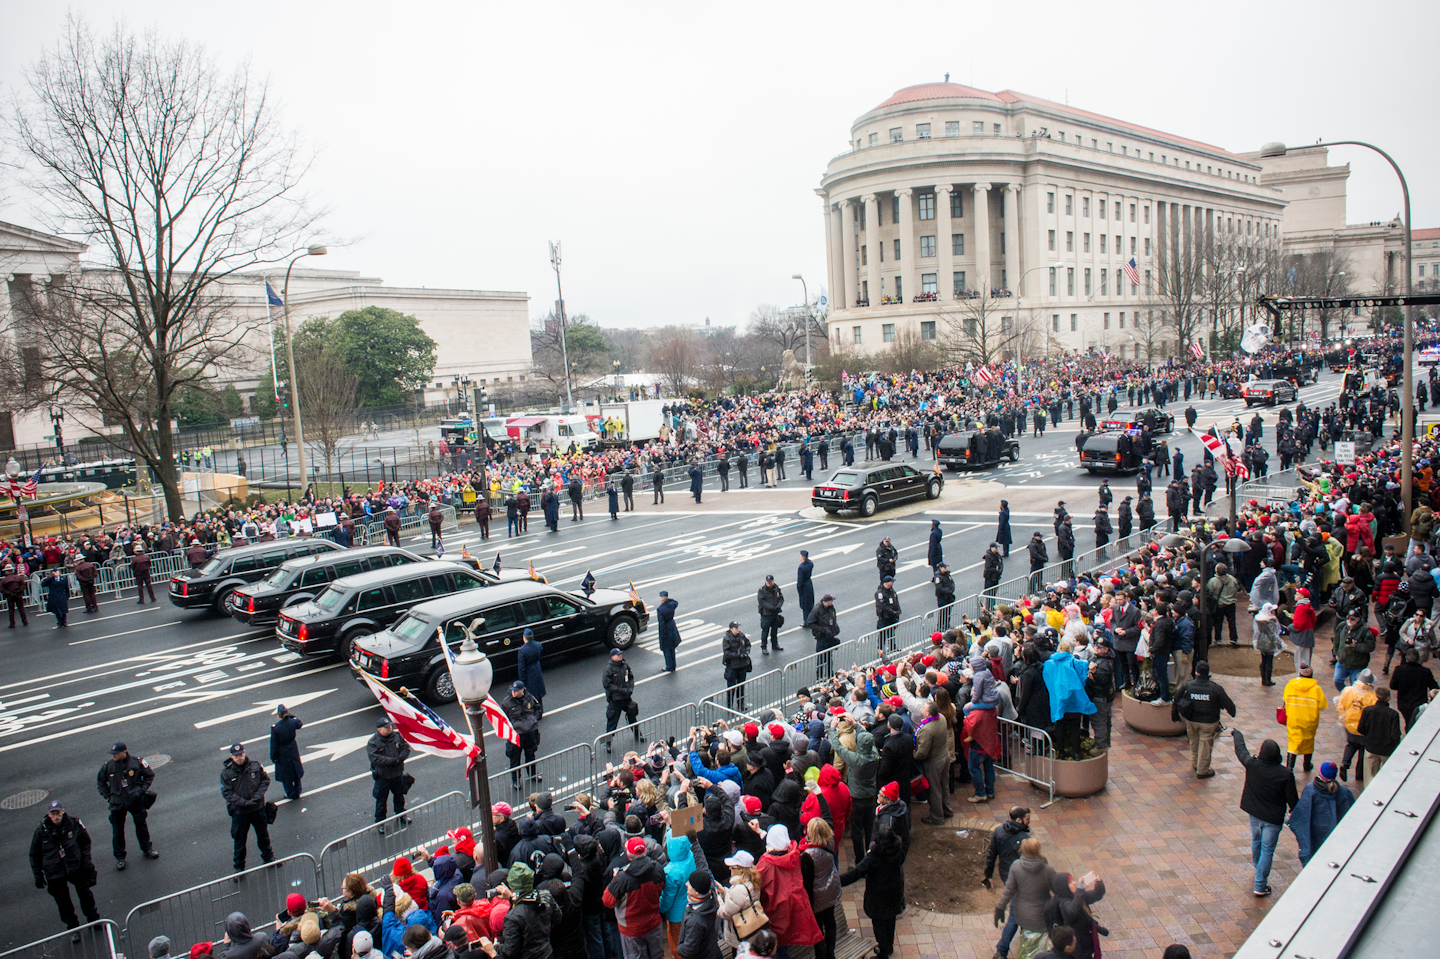 For the 2017 inauguration, thousands of people lined the parade route along Pennsylvania Avenue from the U.S. Capitol to the White House. This year, Bravo Productions’ Greg Jenkins would instead line the route with oversized monitors, where Americans could RSVP as “virtual spectators.”